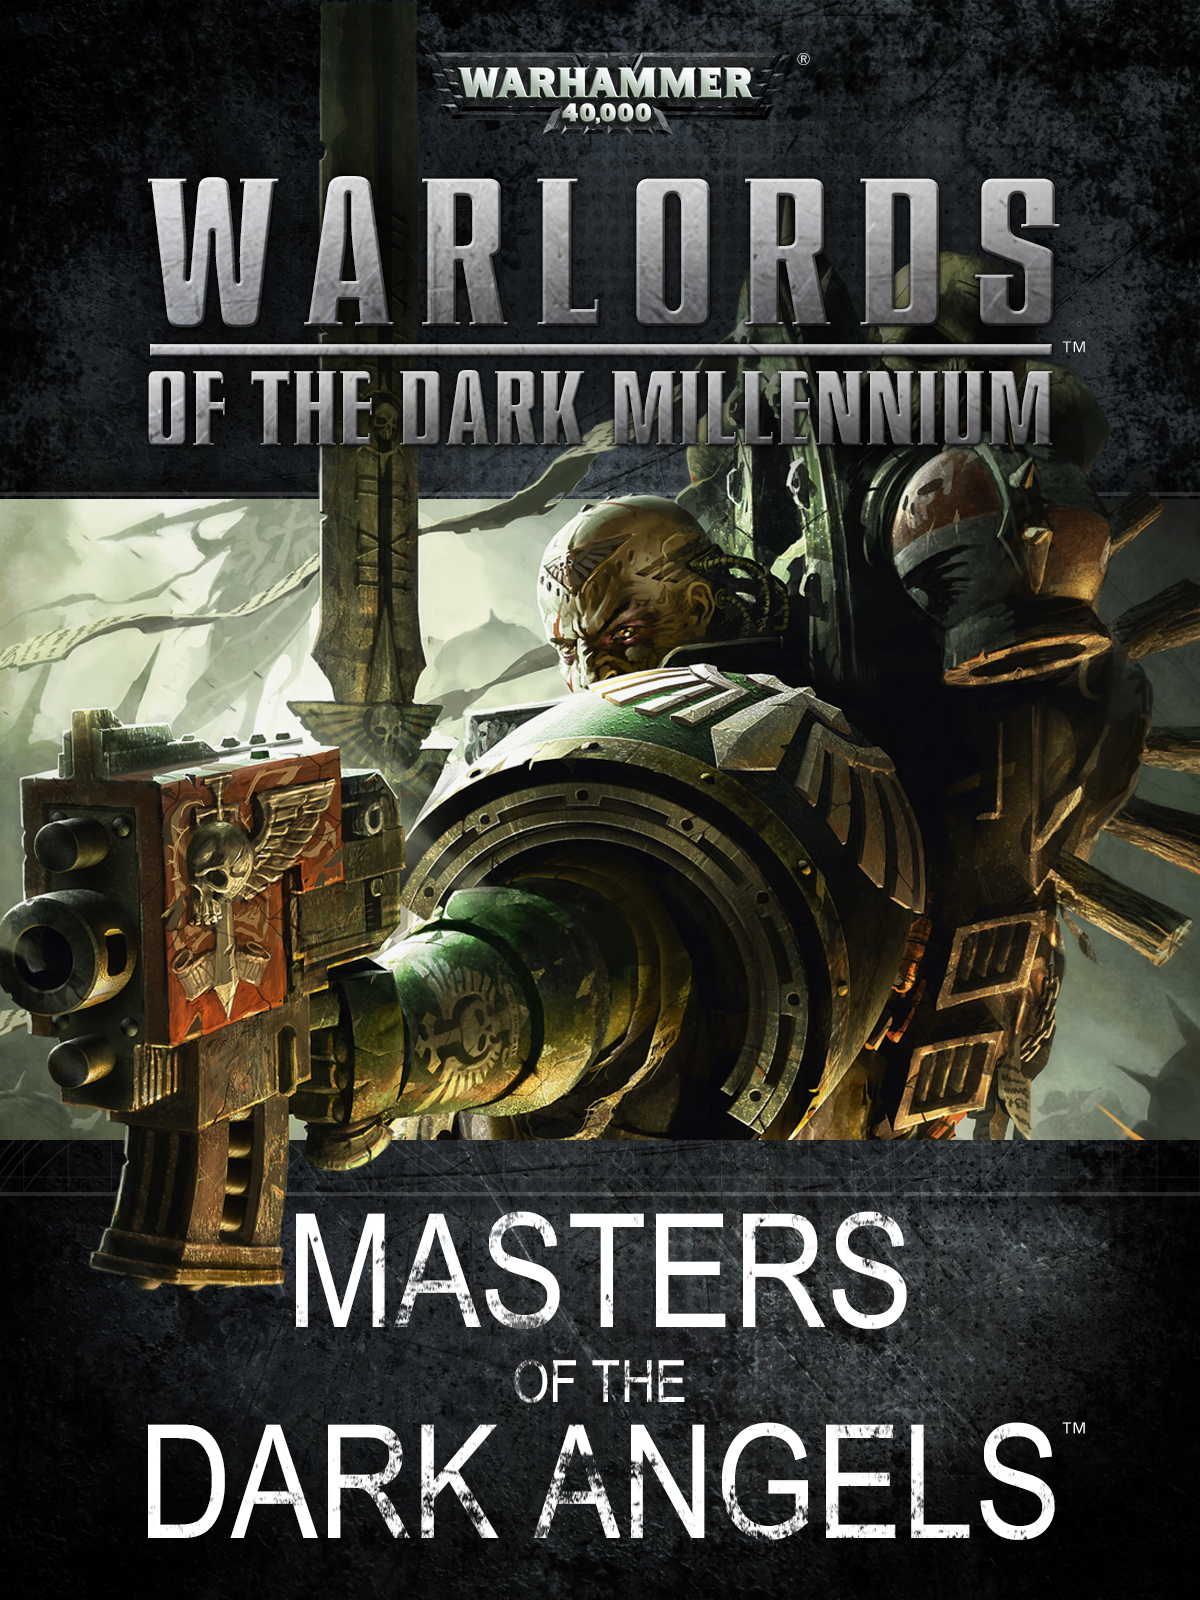 Warlords of the Dark Millennium - Masters of the Dark Angels